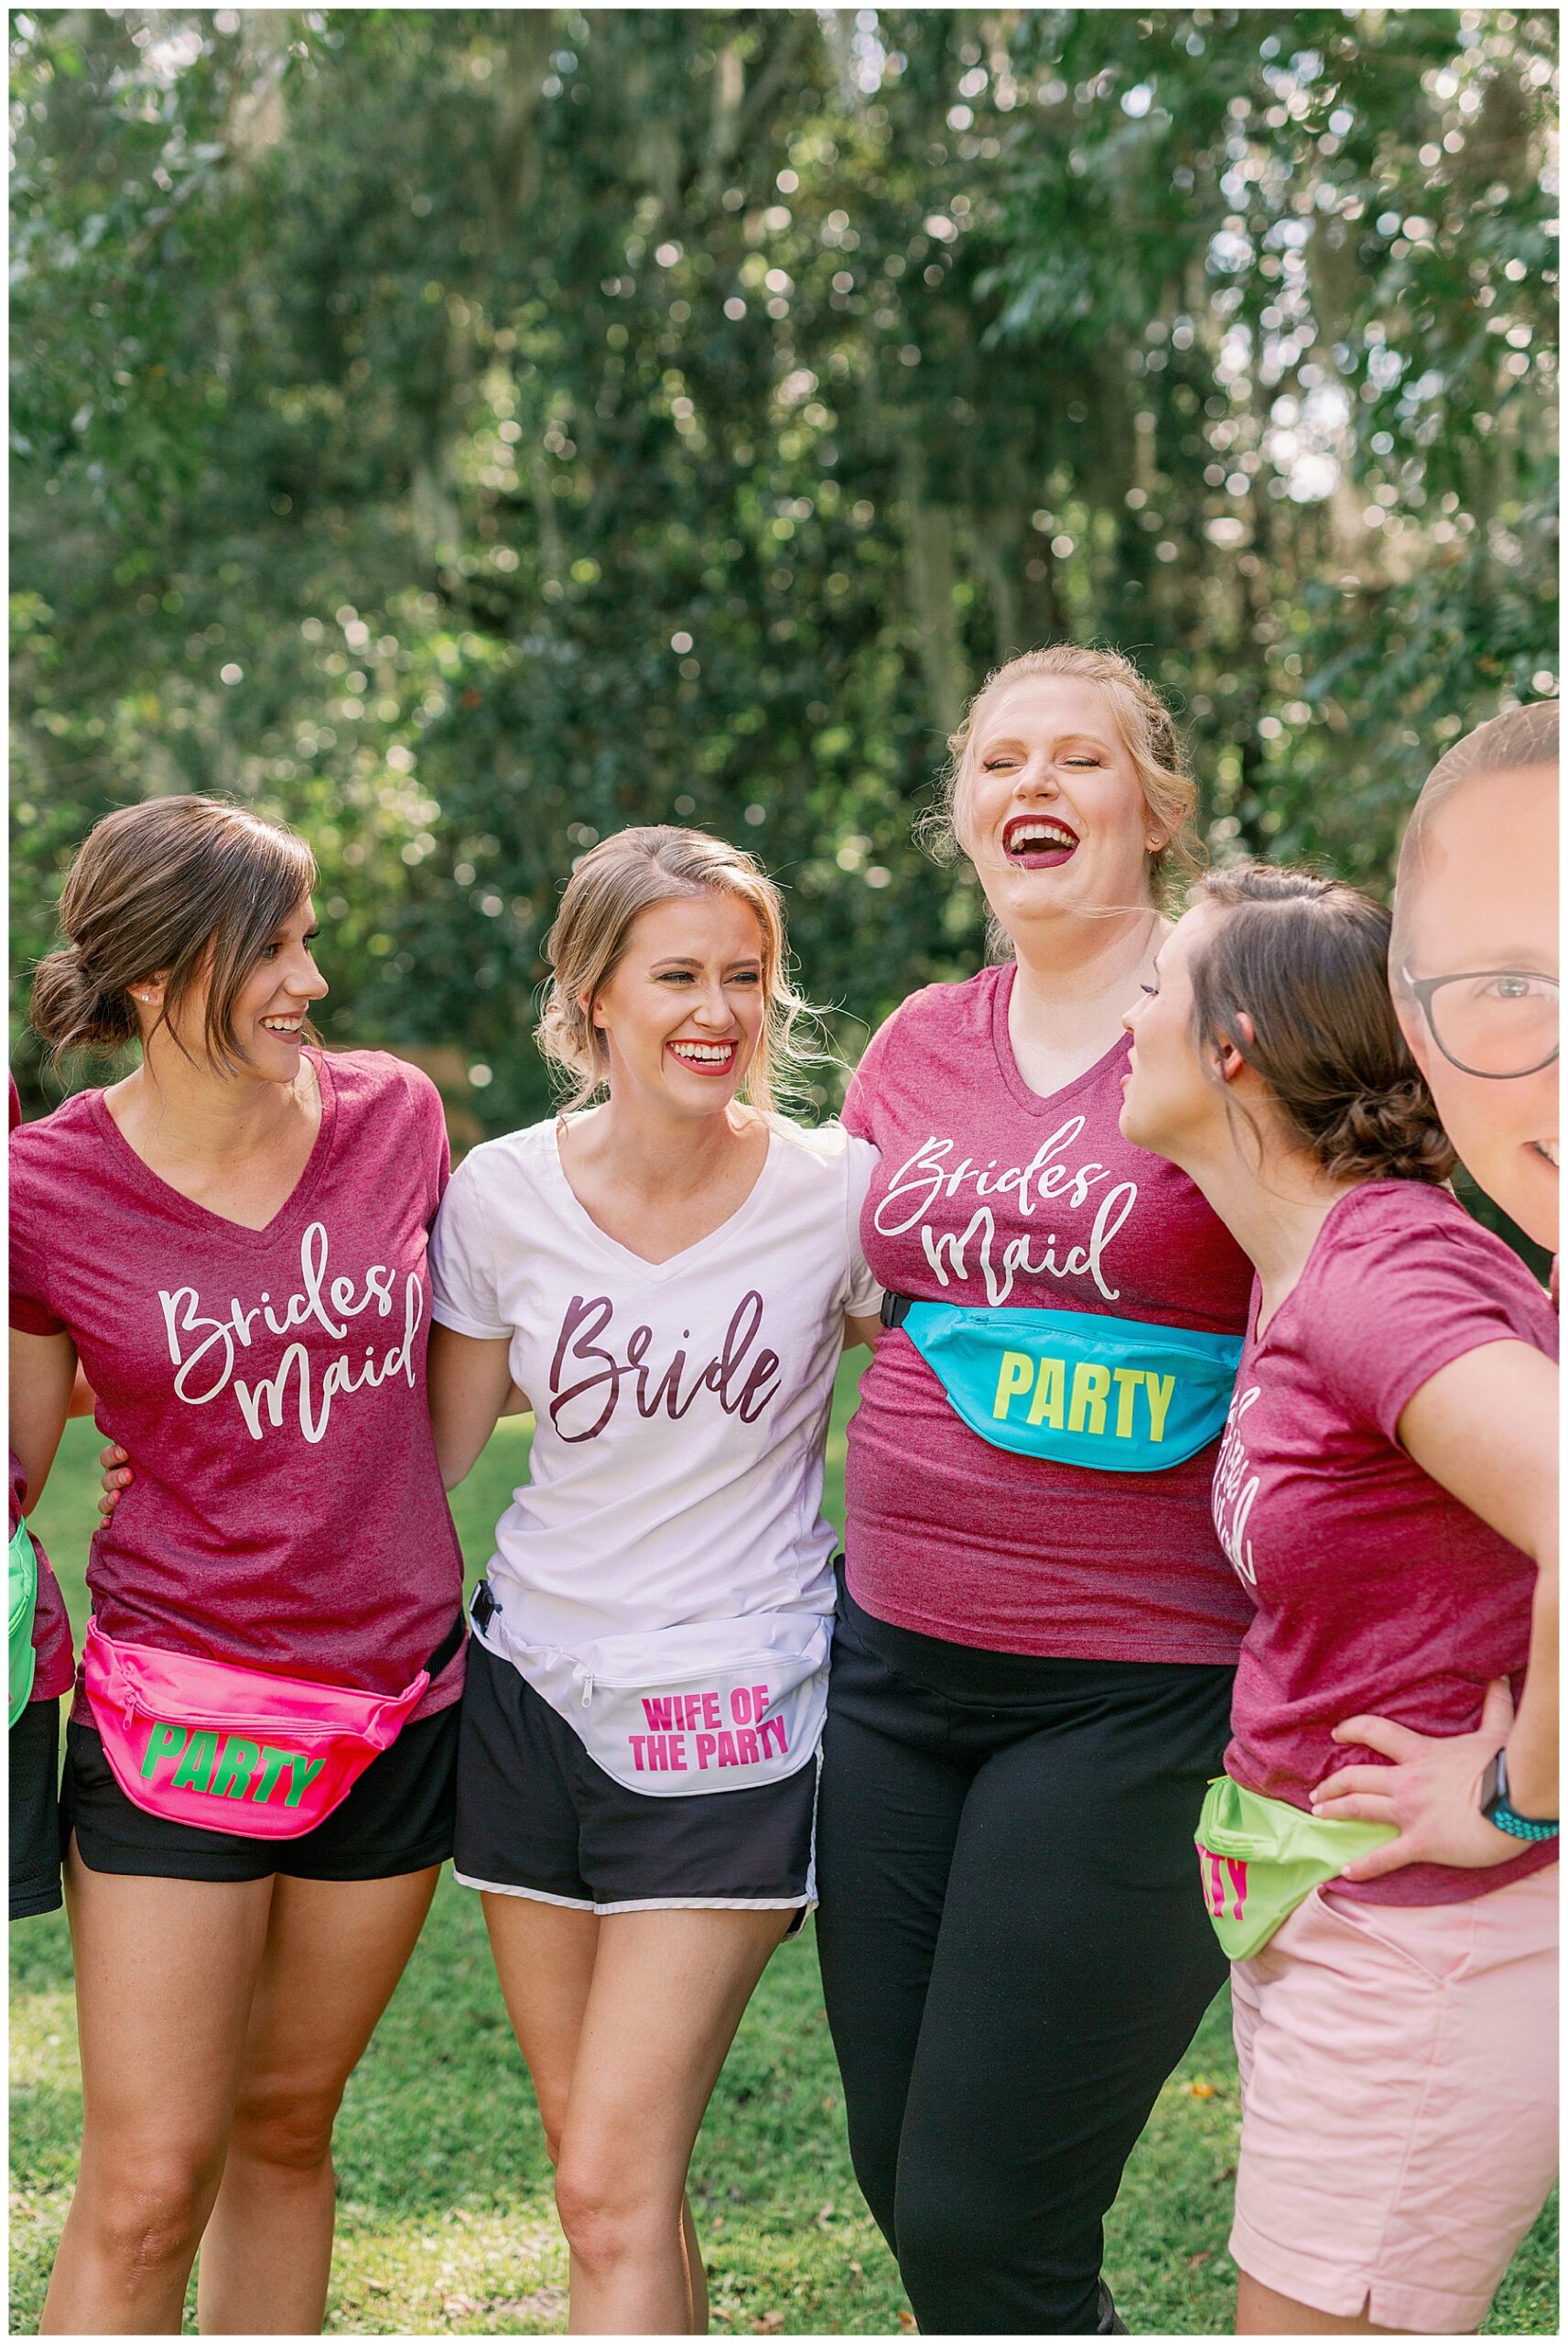 Bride and bridesmaids laughing in their matching tshirts and fanny packs